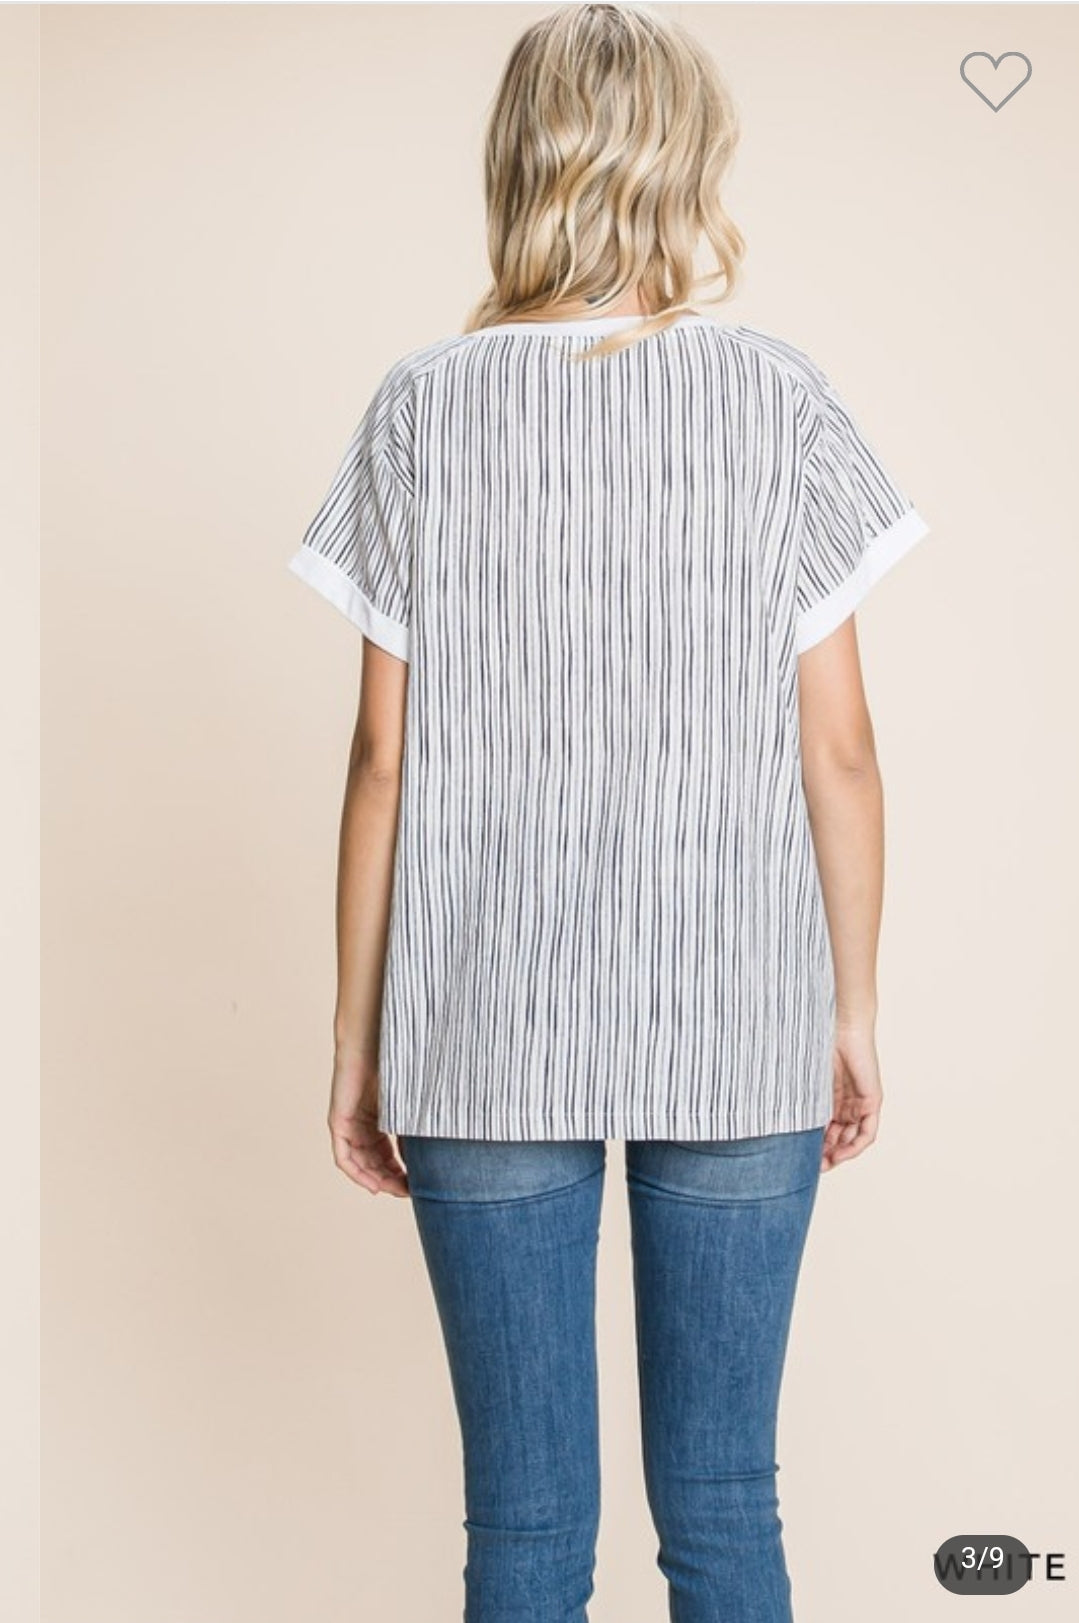 WHITE COTTON TOP W/ NAVY STRIPED CONTRAST BACK